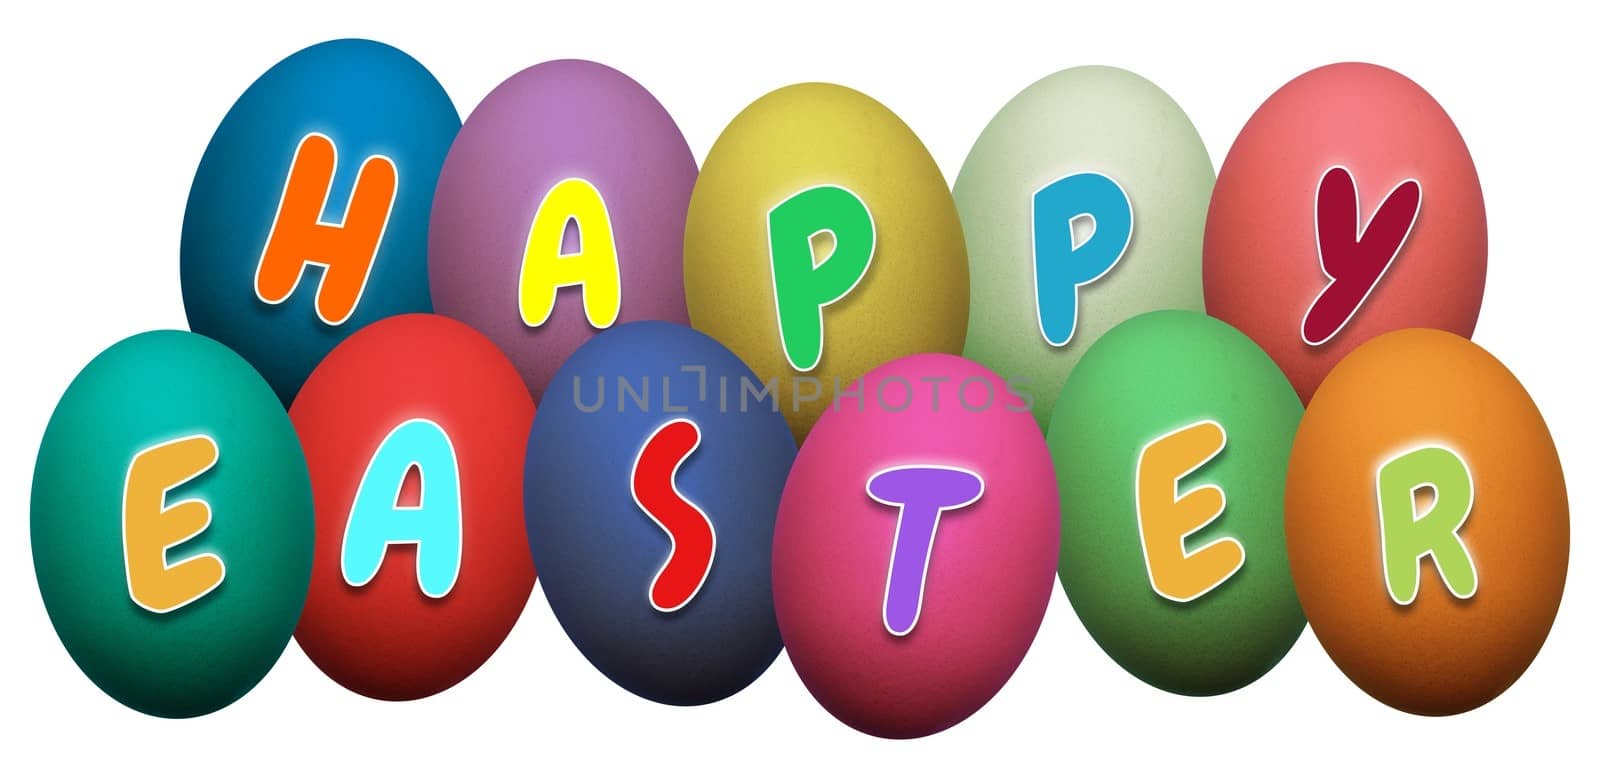 Illustration of colorful eggs with the text "Happy Easter"